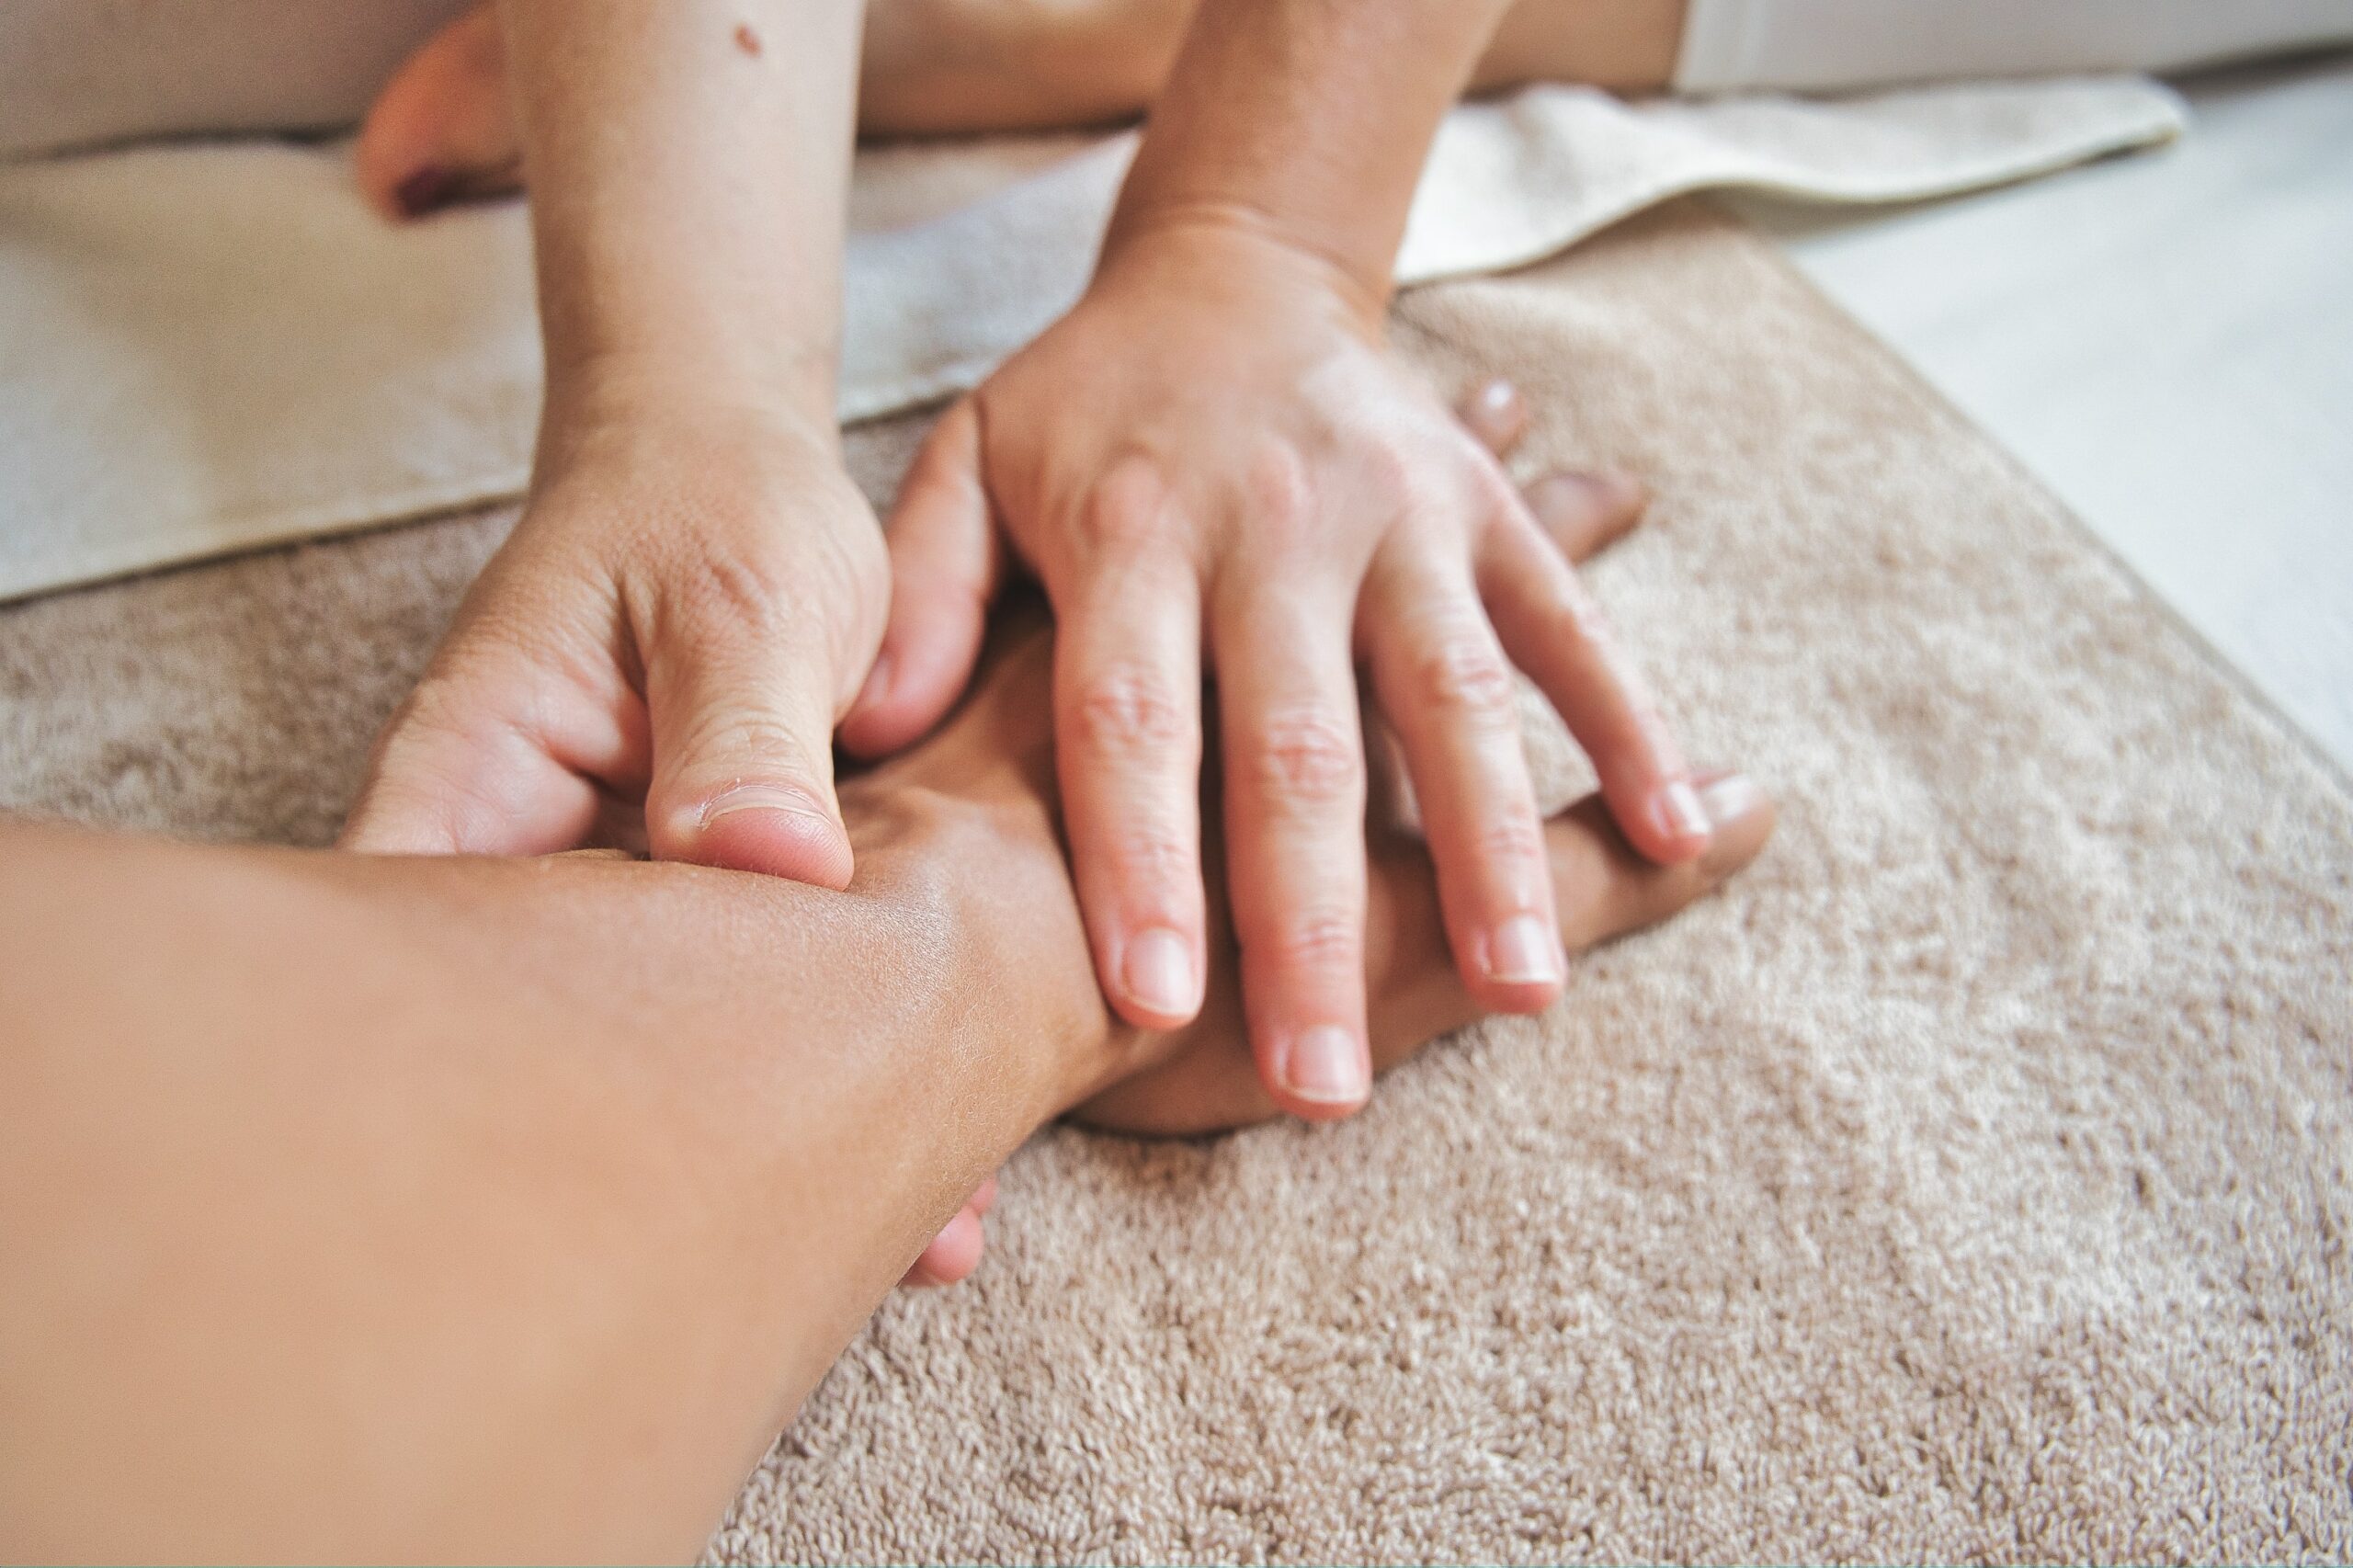 High-Stress Professionals Discover the Benefits of Massage Therapy - Benefits Massage Therapy Massage Toronto Massage Therapists Benefits - 001